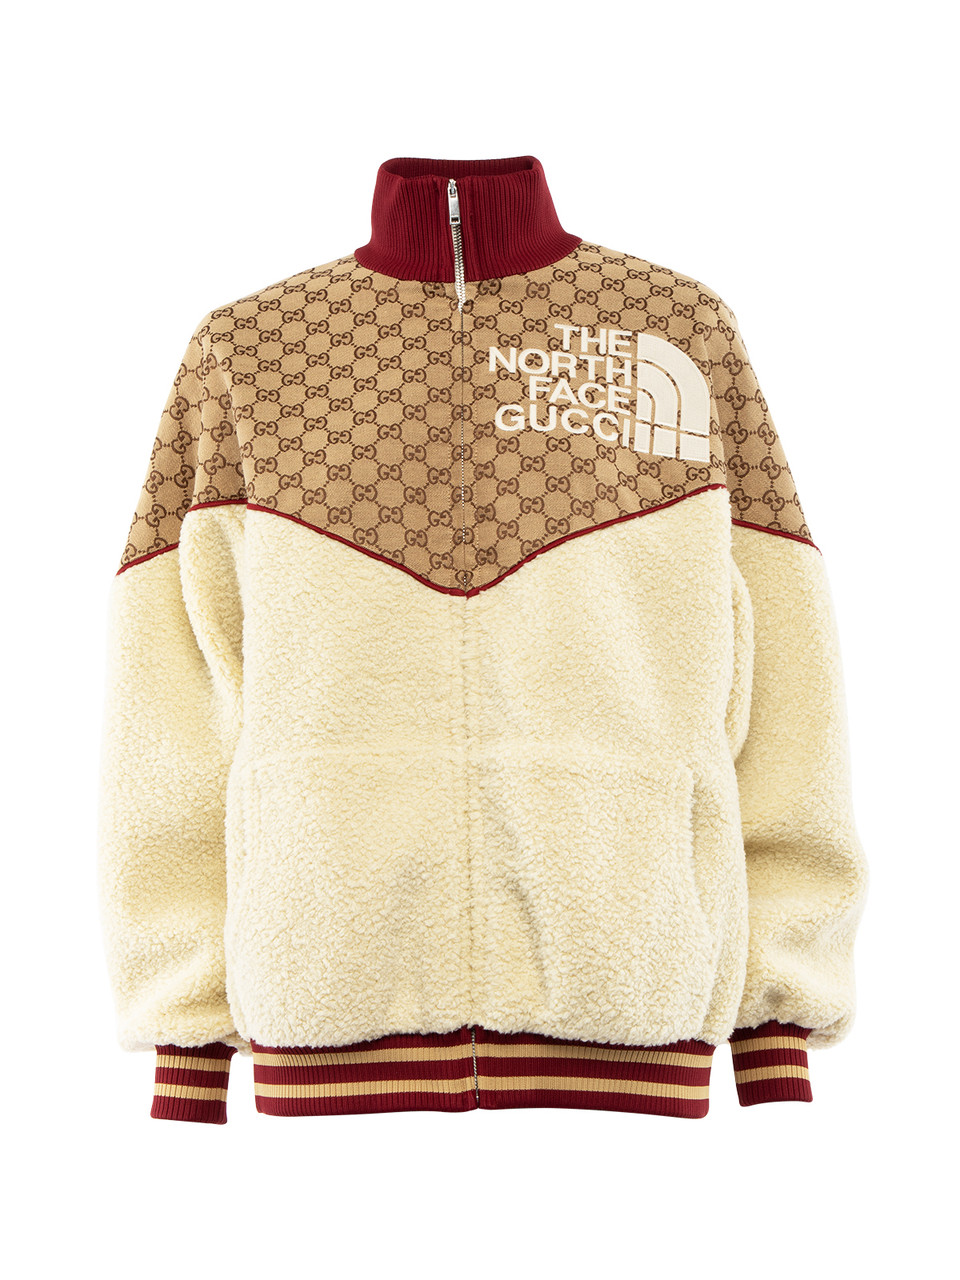 Gucci,The North Face x Gucci Canvas Shearling Jacket,Multicolour,Cotton,Abstract